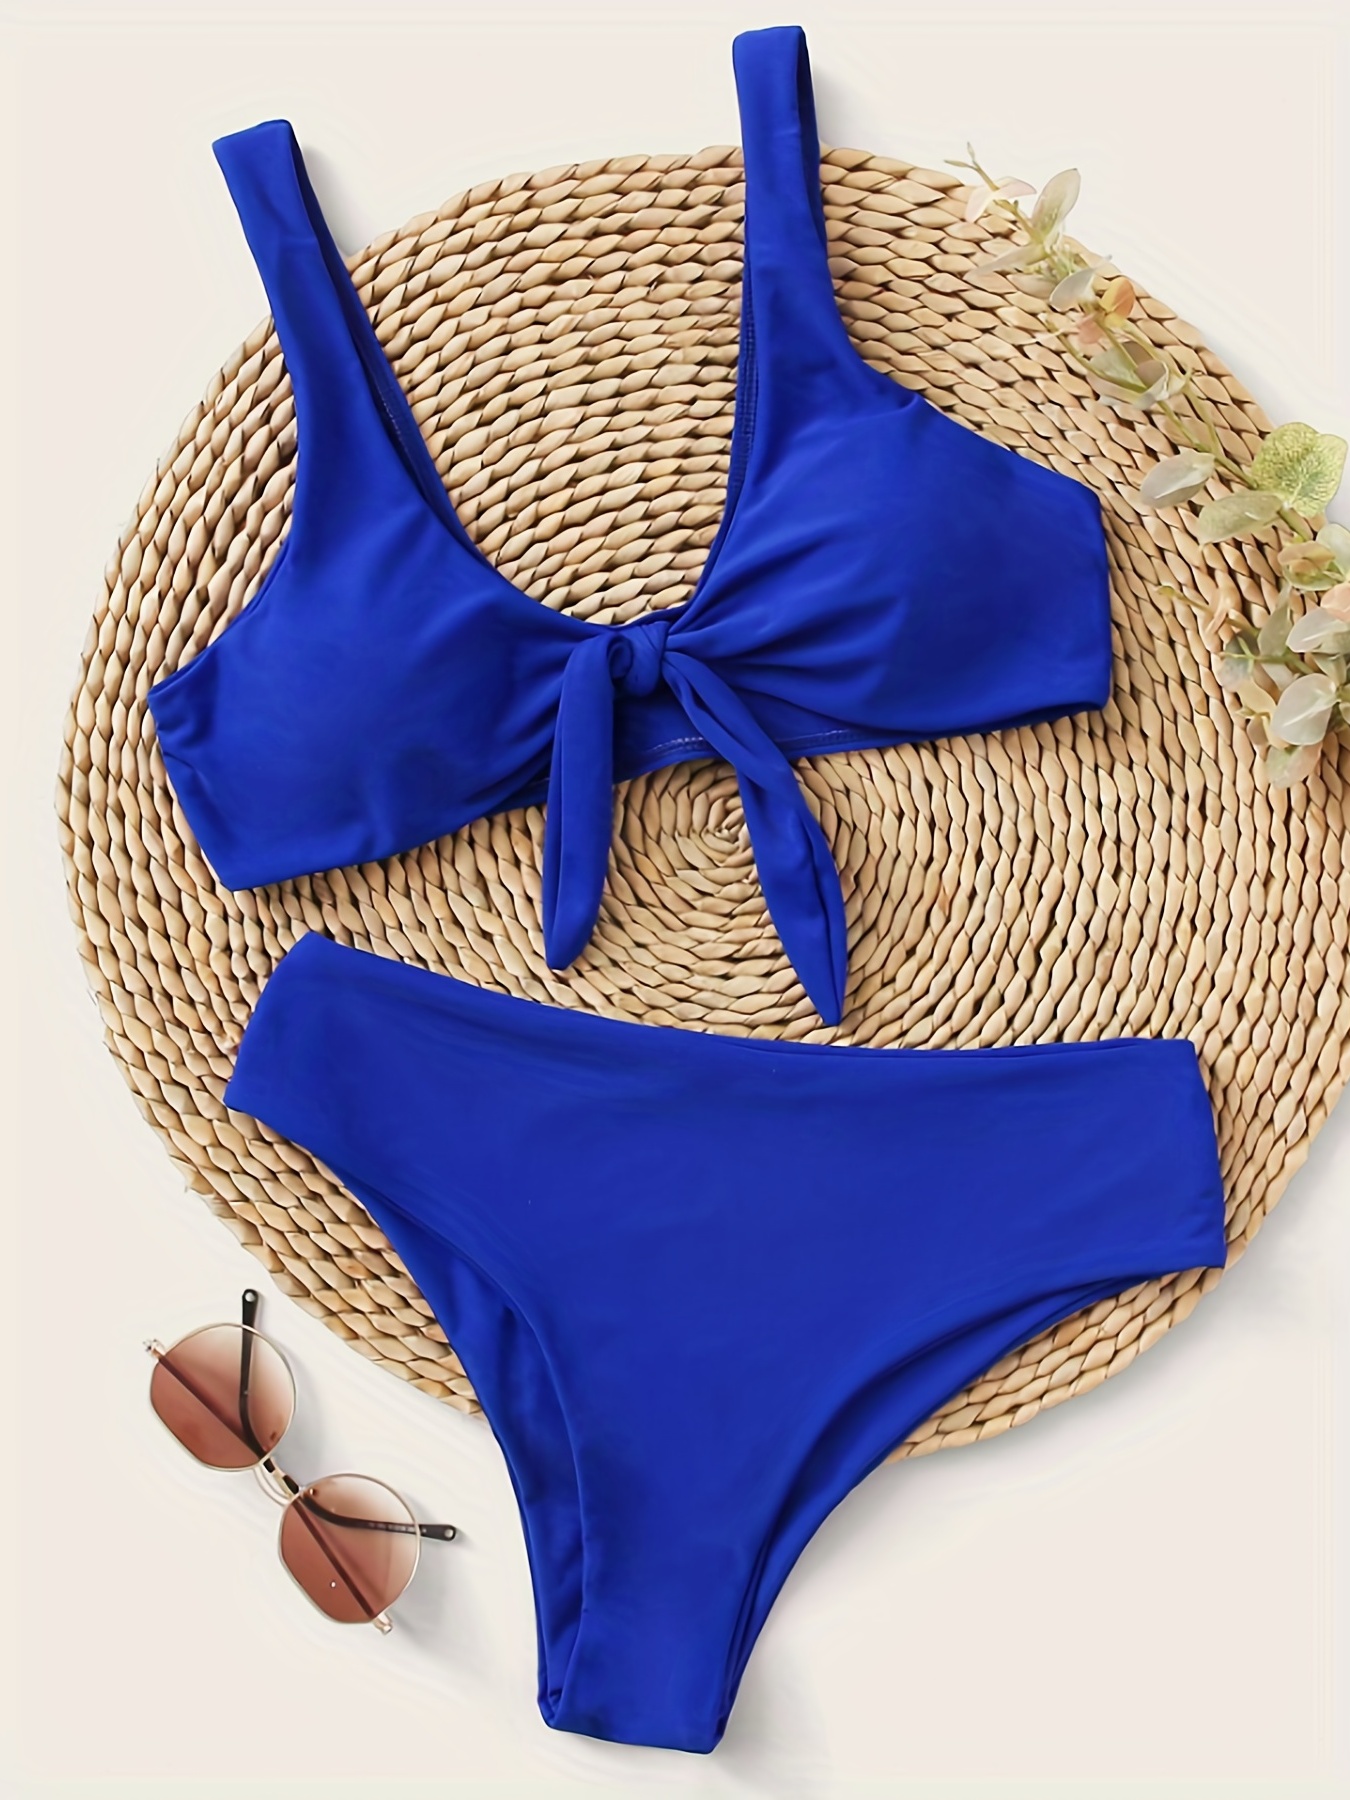 ZAFUL Women's Bikini Set Two Piece Swimsuits Bathing Suits Solid Tie Front  High Waist Swimming Suit